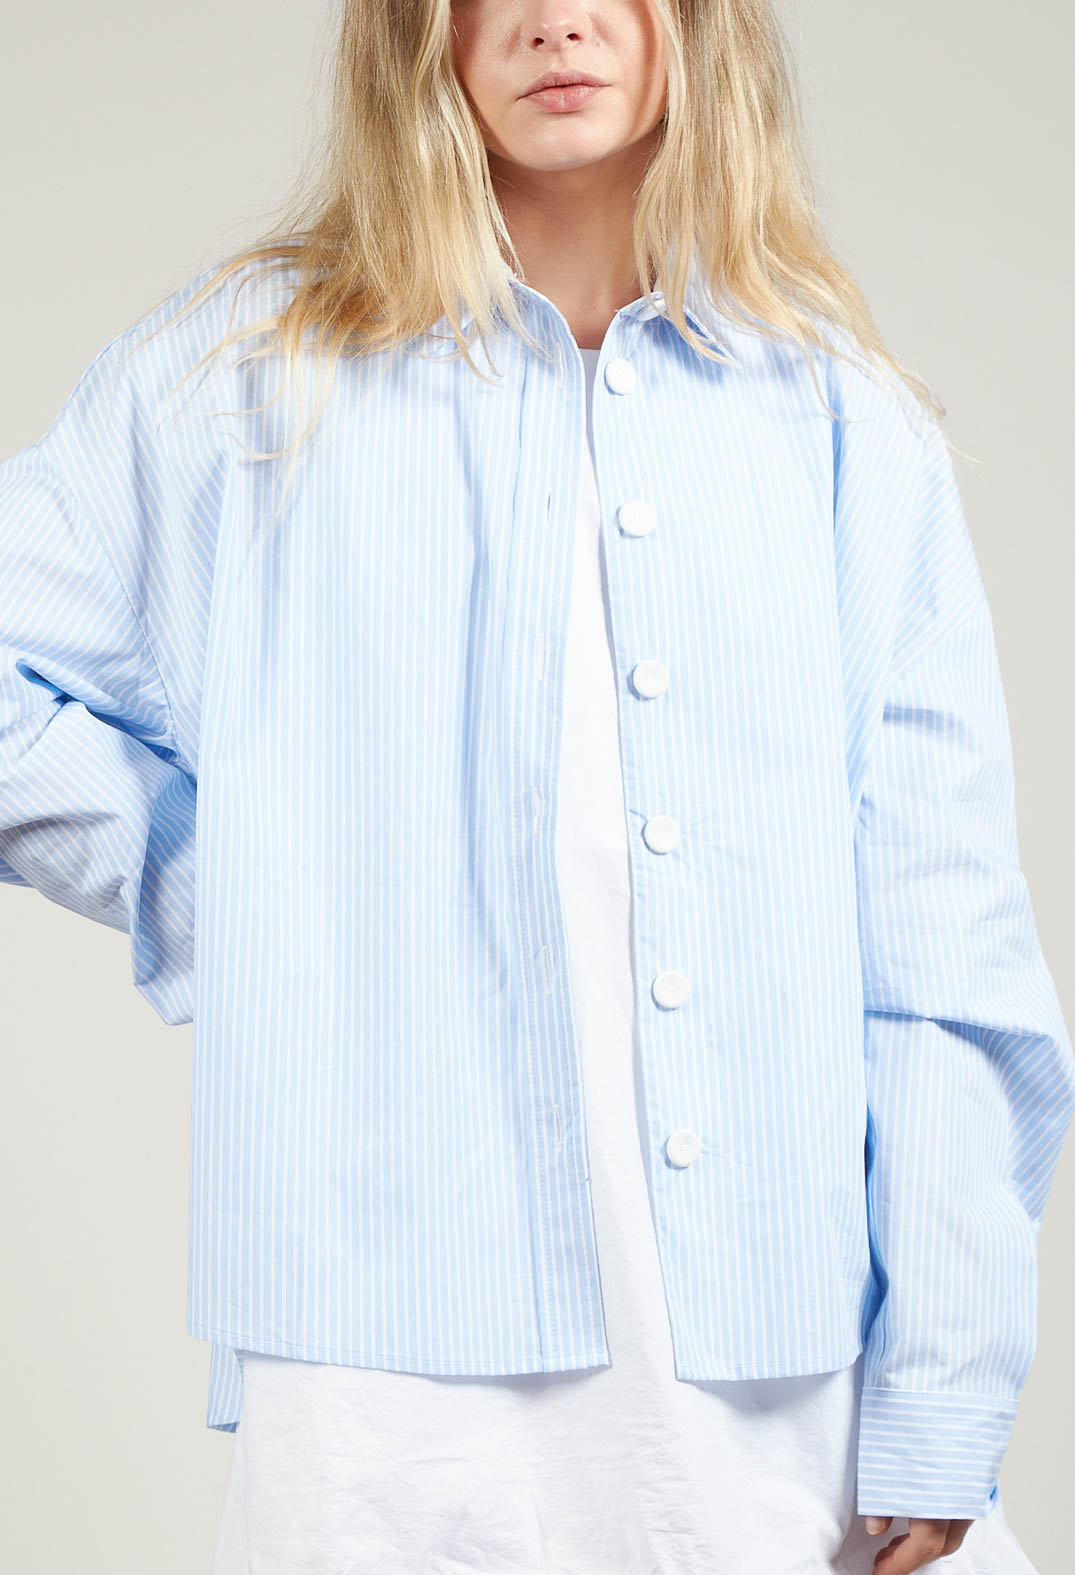 Oxford Shirt in Striped Blue